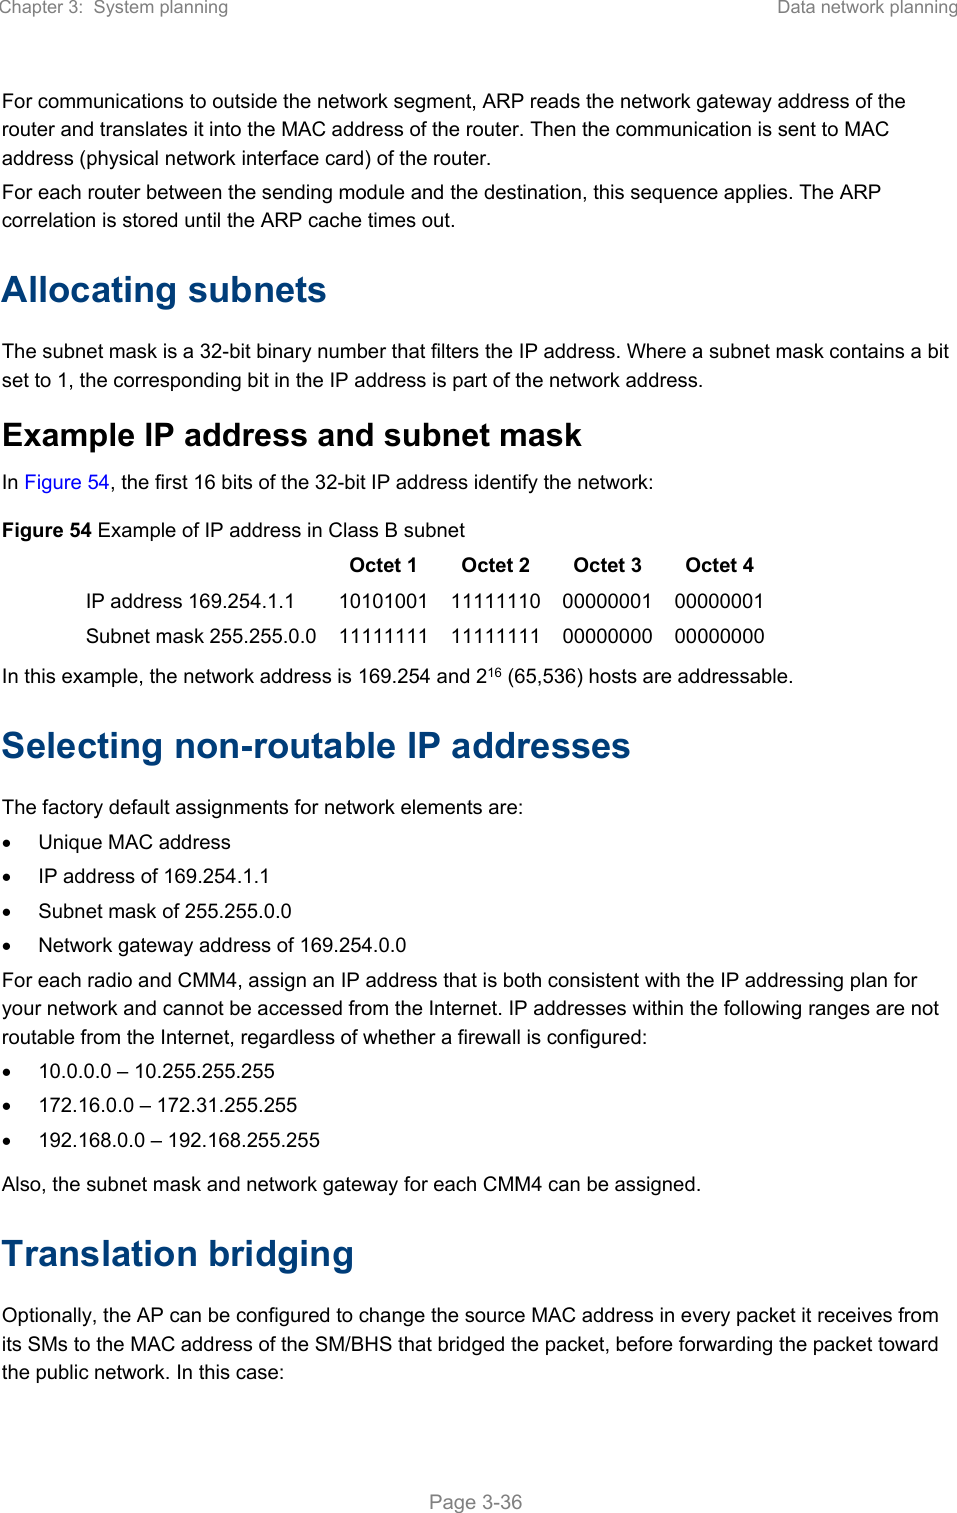 Page 169 of Cambium Networks 50450M 5GHz Point to MultiPoint Multi User MIMO Access Point User Manual PART1